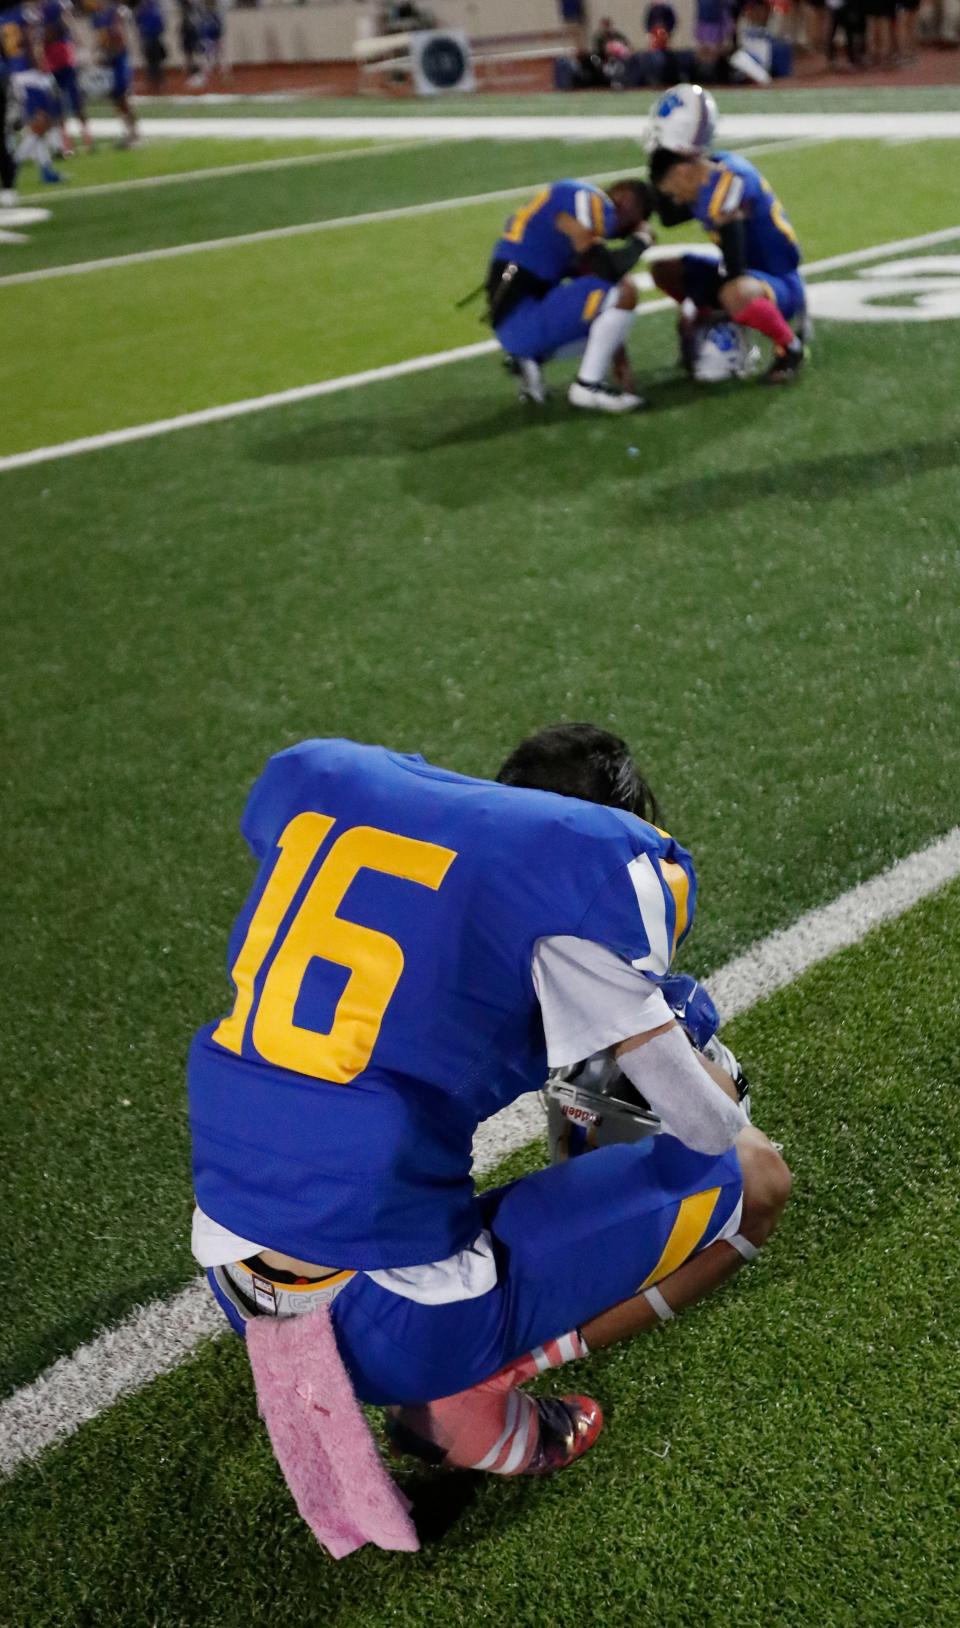 Frenship’s Jason Delagarza (16) kneels after the end of the game. Odessa Permian faces Frenship in a District 2-6A football game, Friday, Oct. 21, 2022, at Peoples Bank Stadium in Wolfforth.